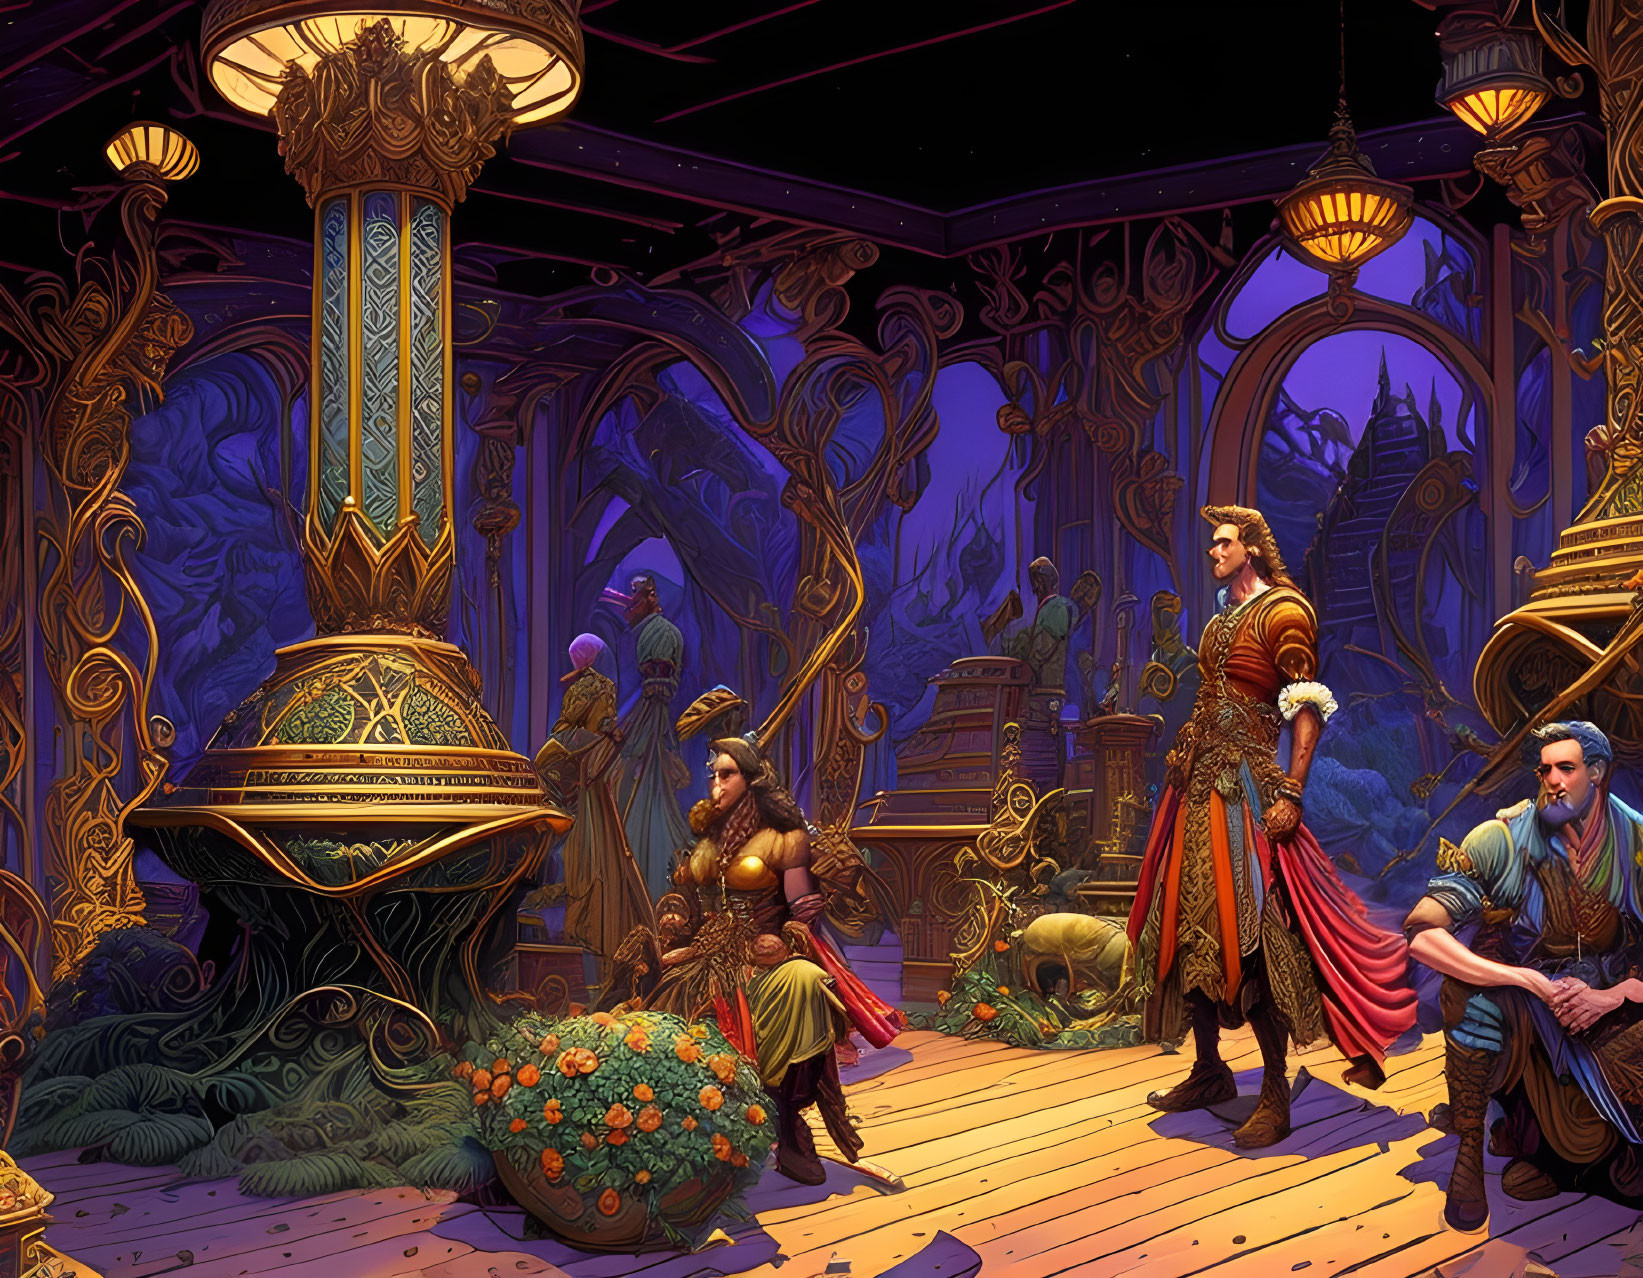 Intricate historical chamber with three characters in ornate attire surrounded by lanterns and lush flora